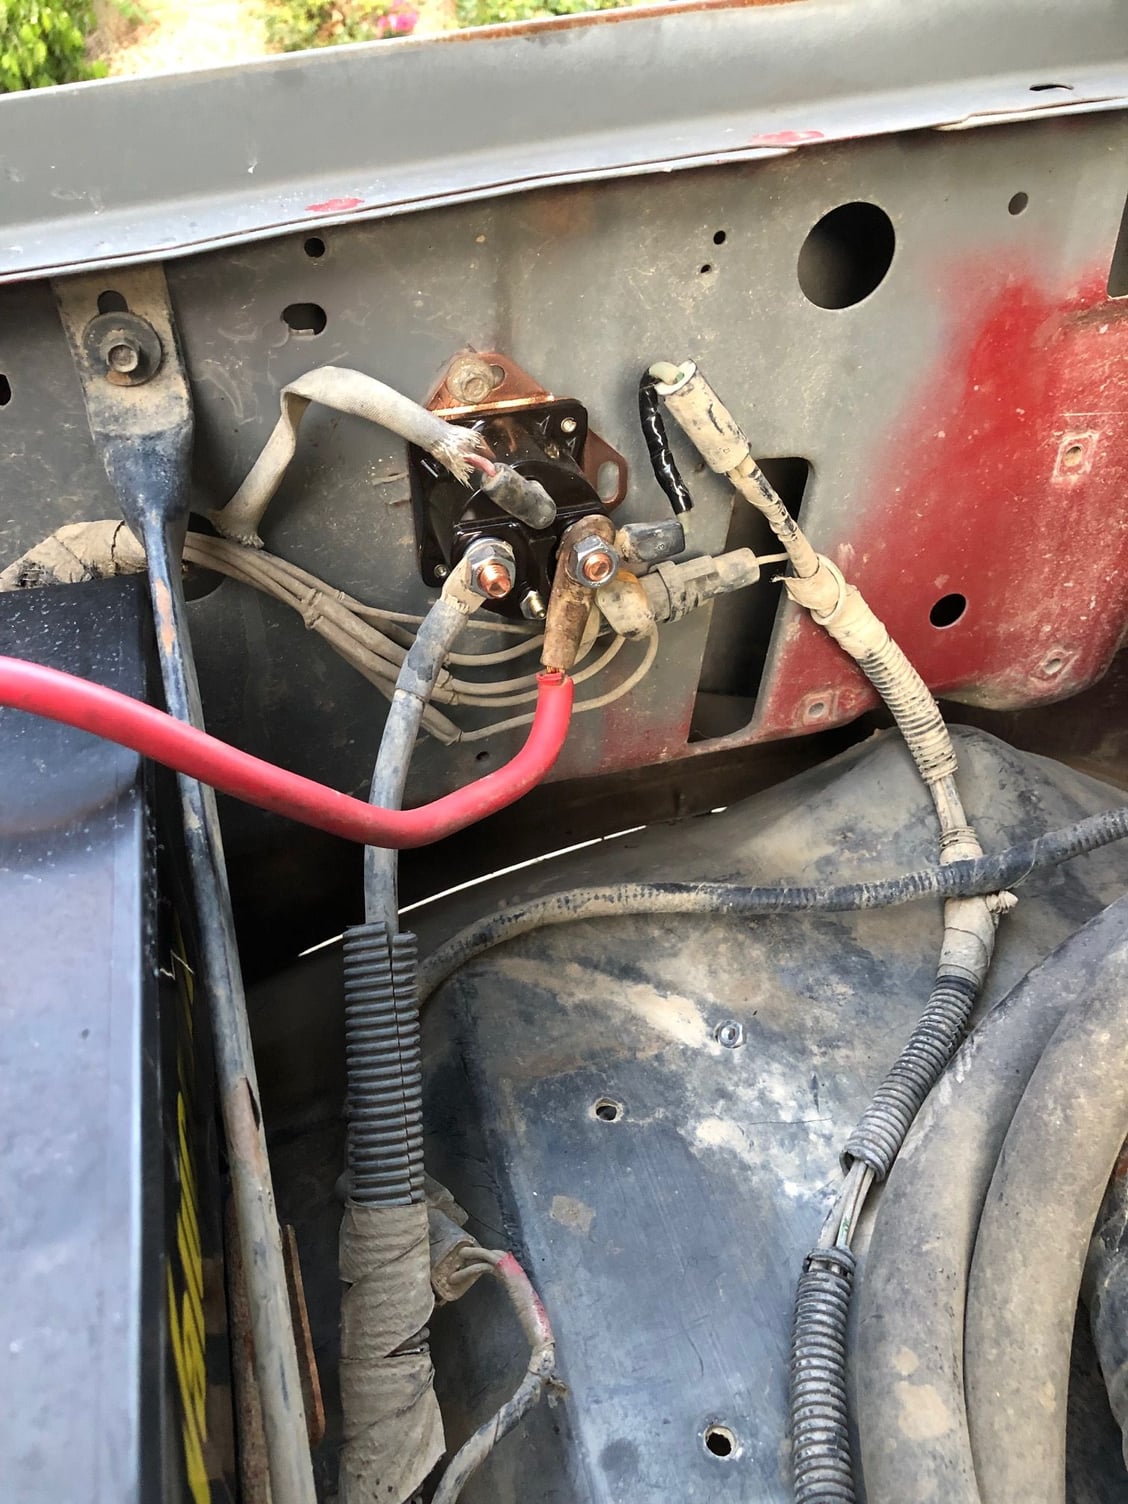 Troubleshooting an installed remote starter switch? - Ford Truck